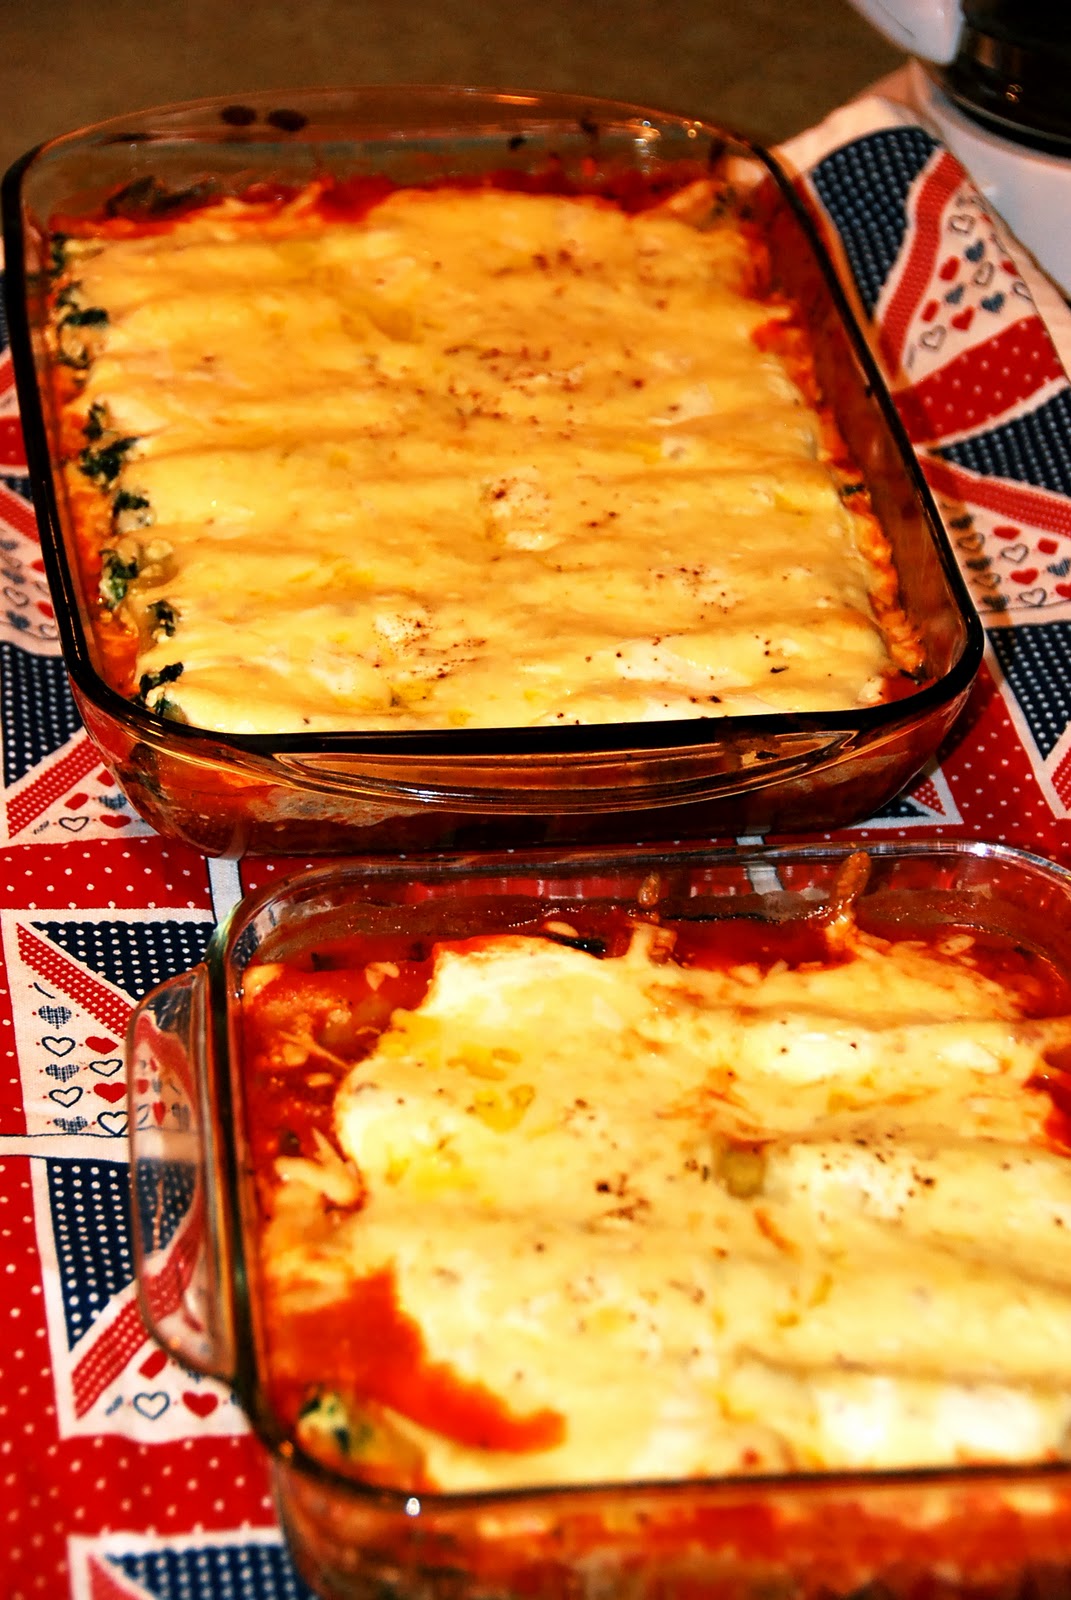 LoveLettersInaPan: Jamie Oliver's Awesome Spinach and Ricotta Cannelloni